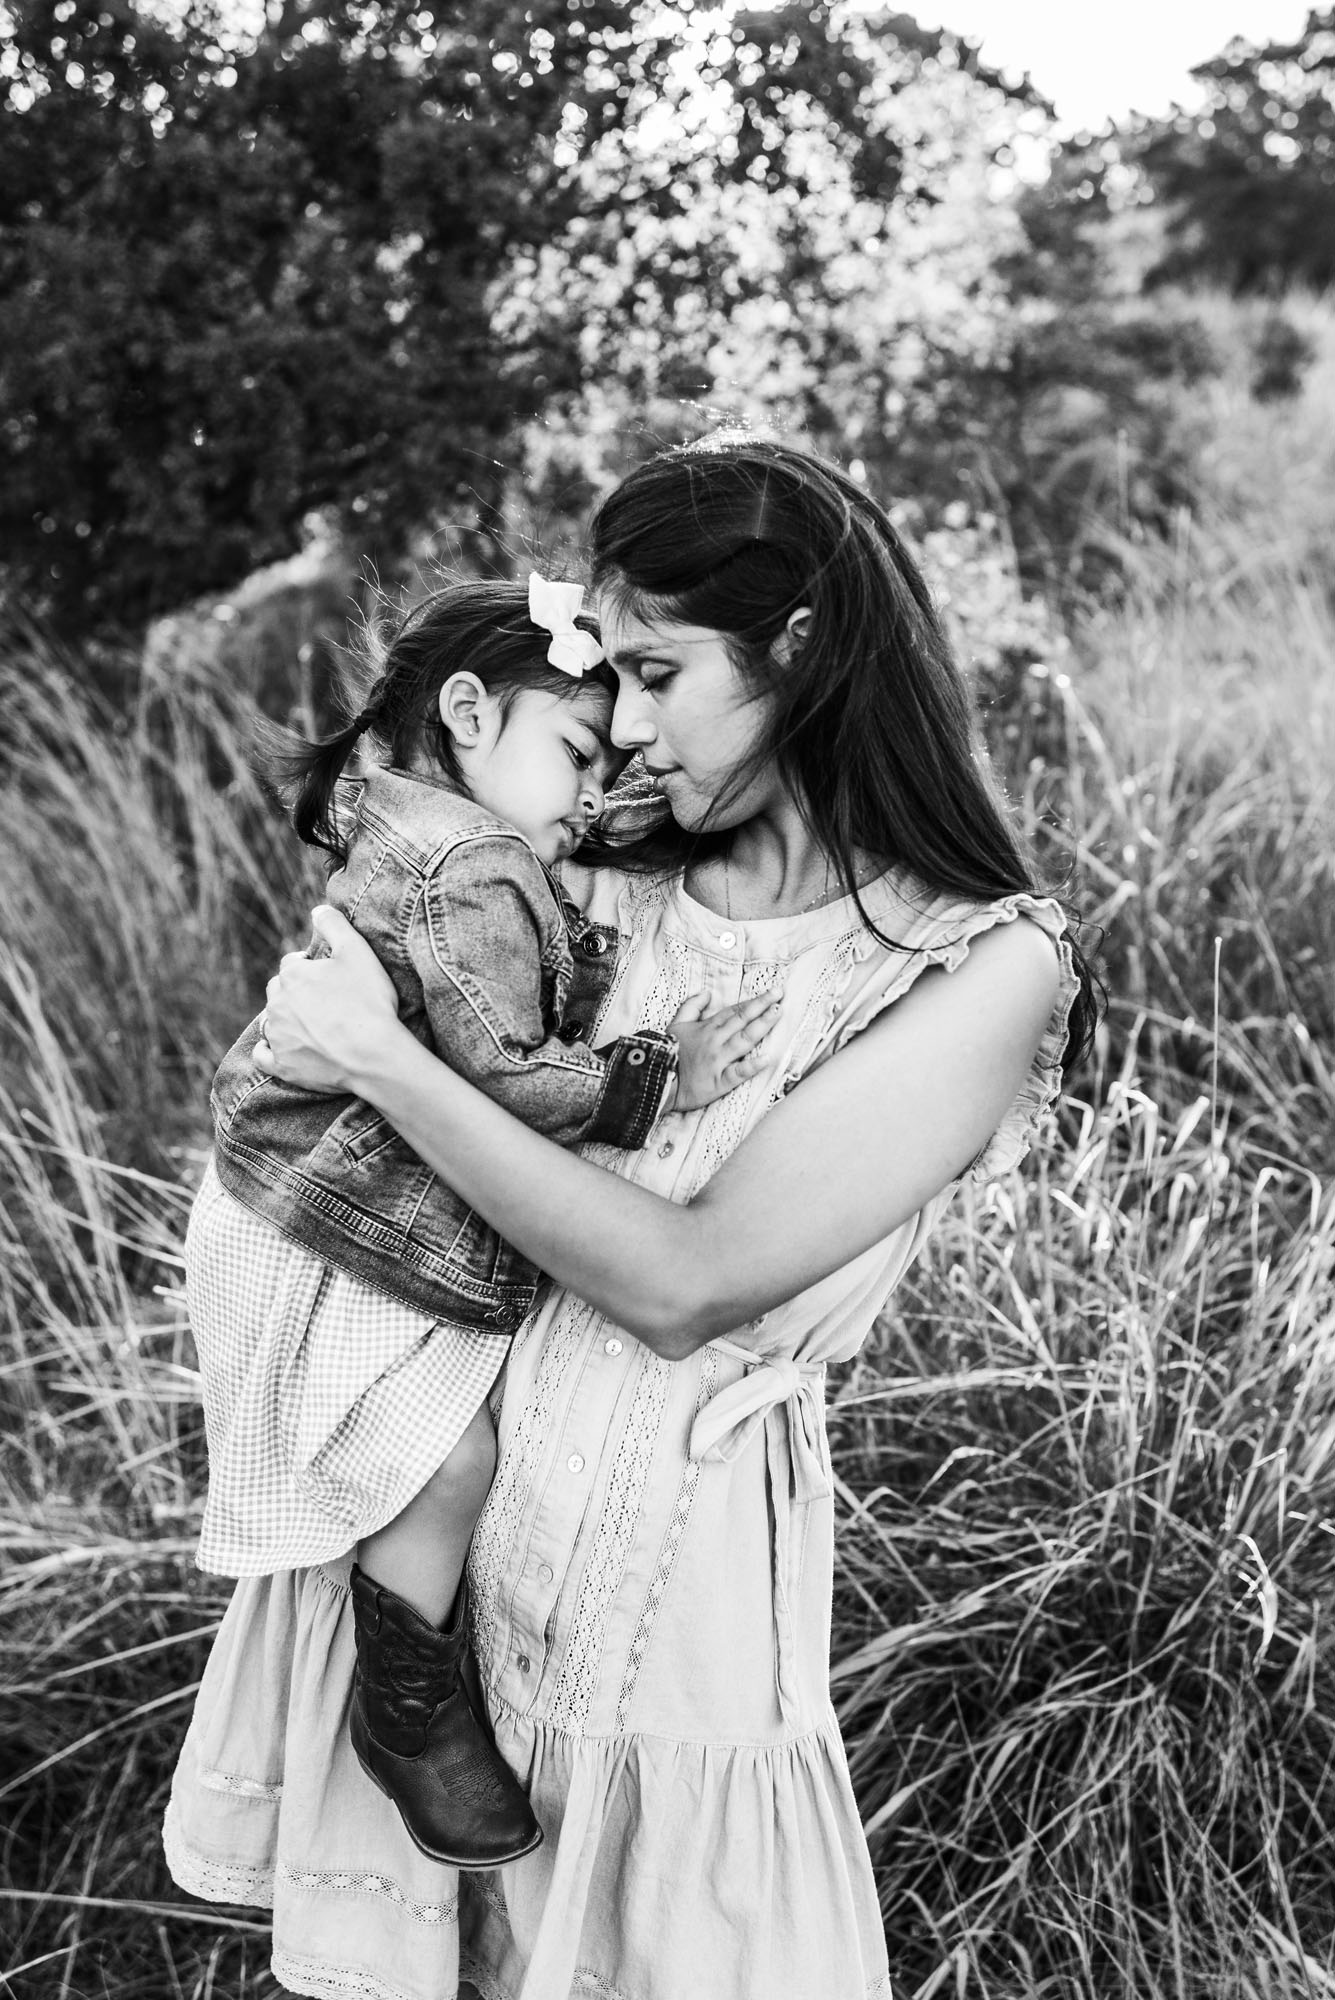 Mother hugging daughter in field, San Antonio lifestyle family photographer